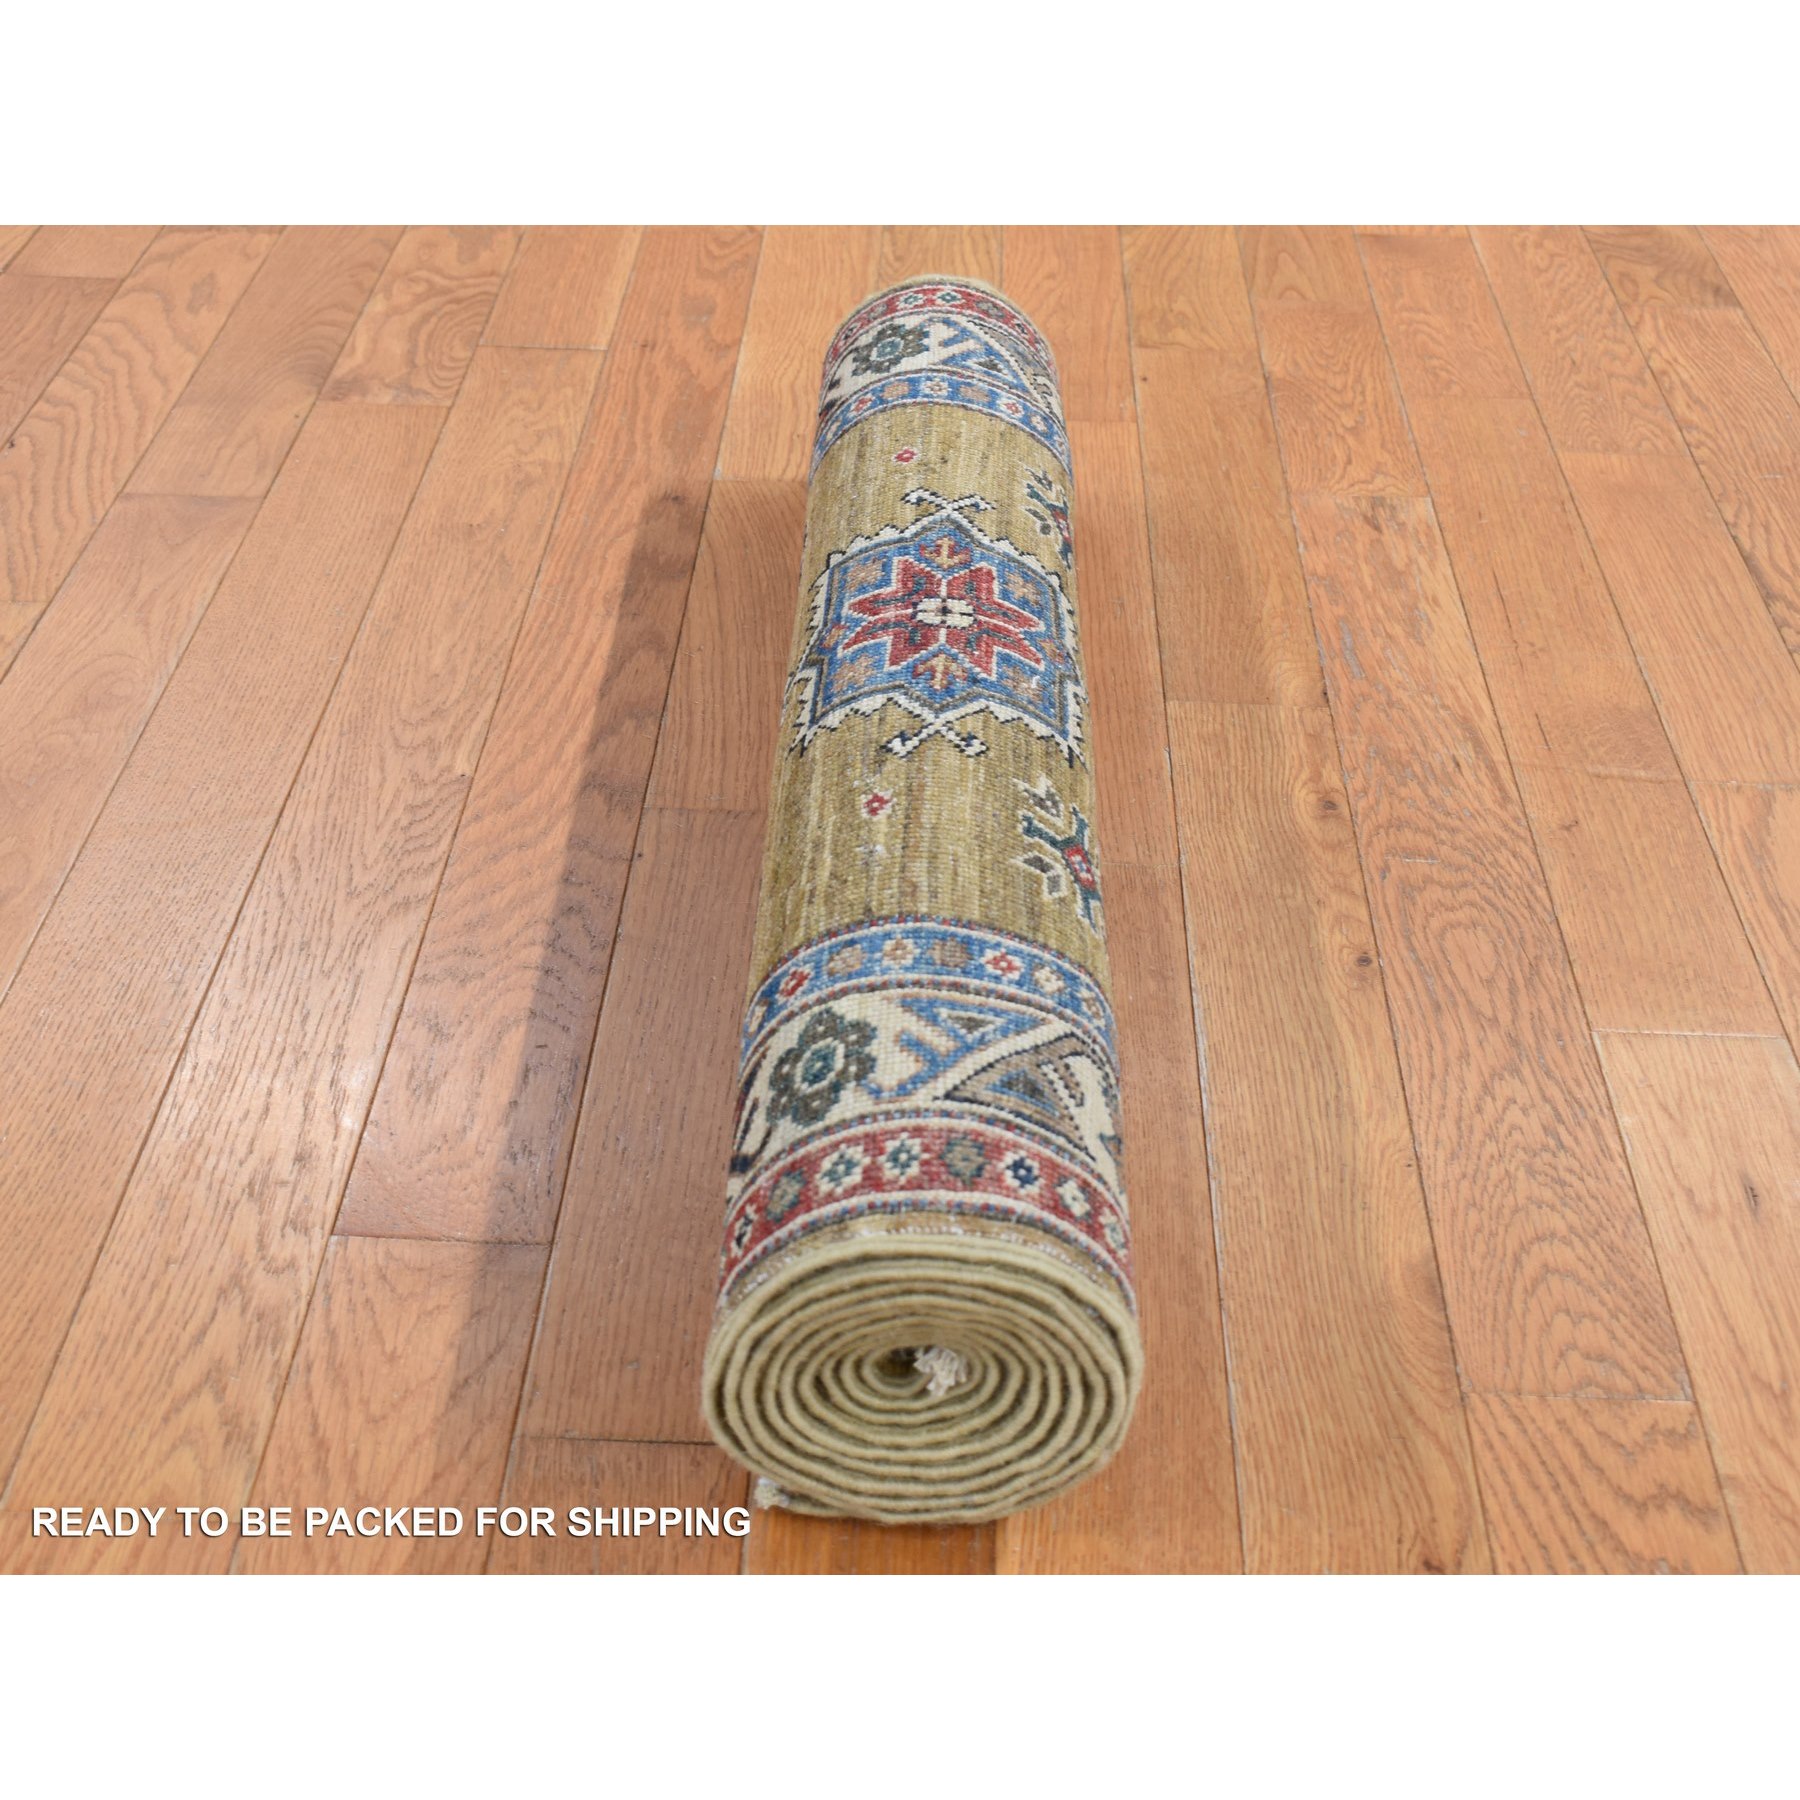 Spill - Blue, Olive Green, Pink and Cream Yoga Mat | Zazzle